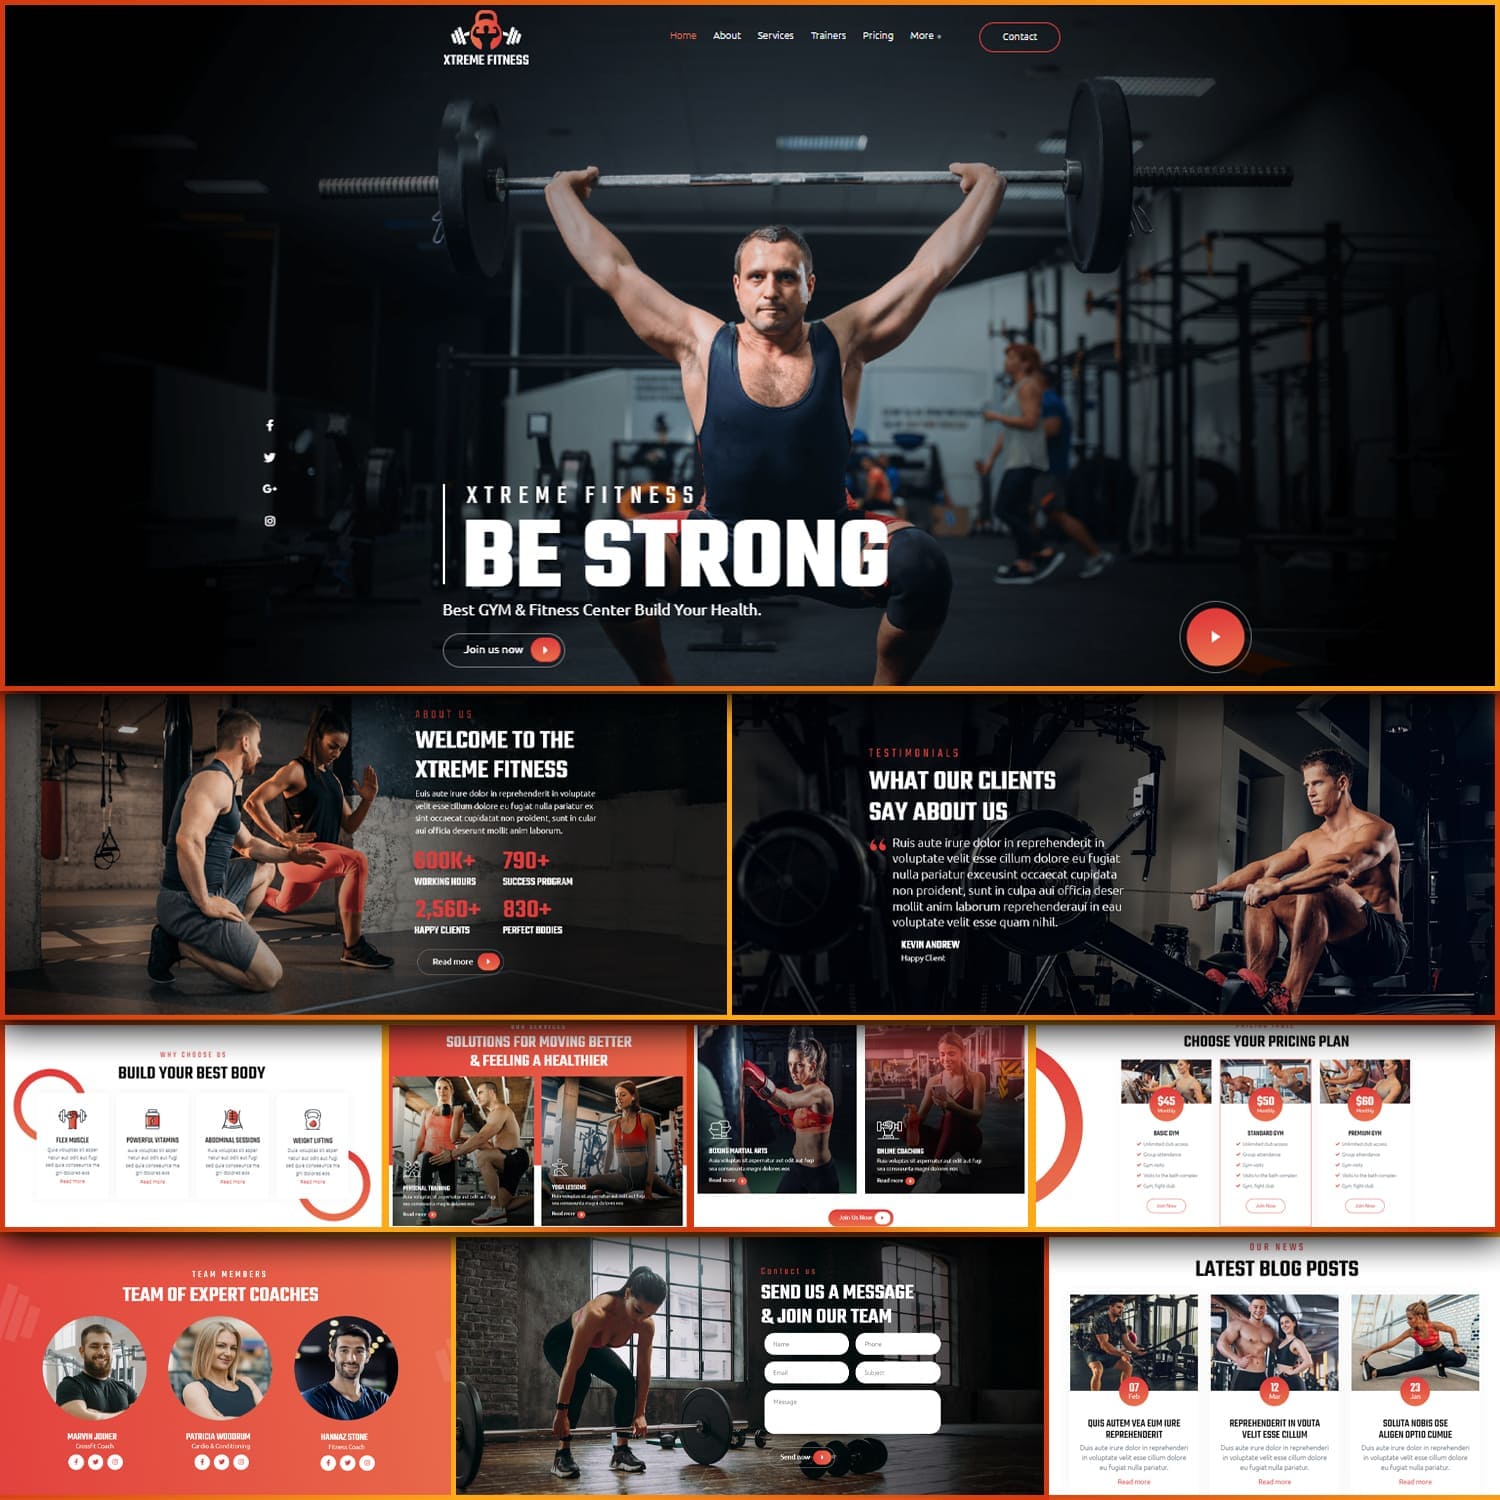 Xtreme fitness – best GYM and fitness center build your health.